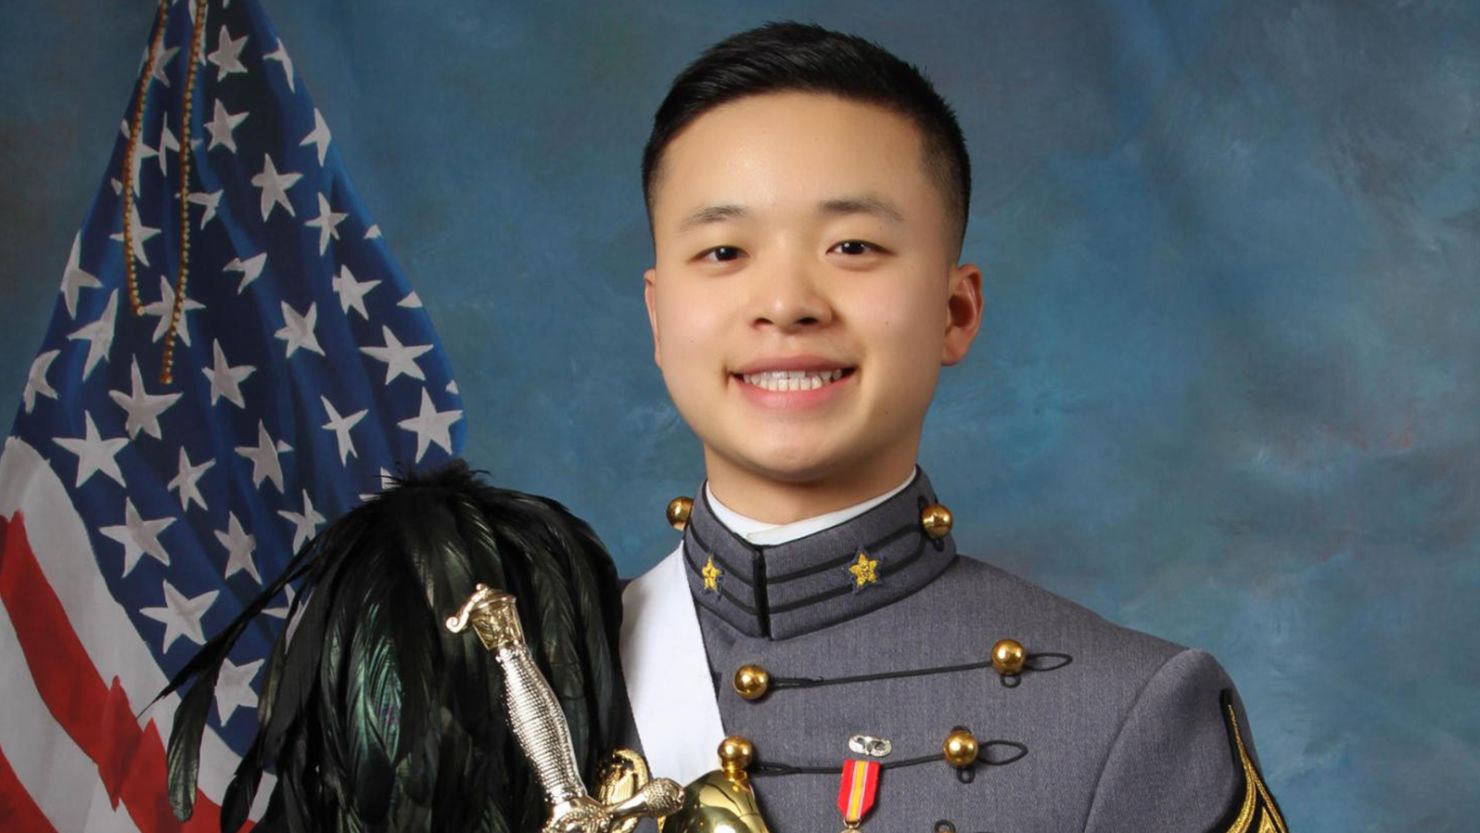 Cadet Peter Zhu, 21, succumbed to injuries from a ski accident earlier this year